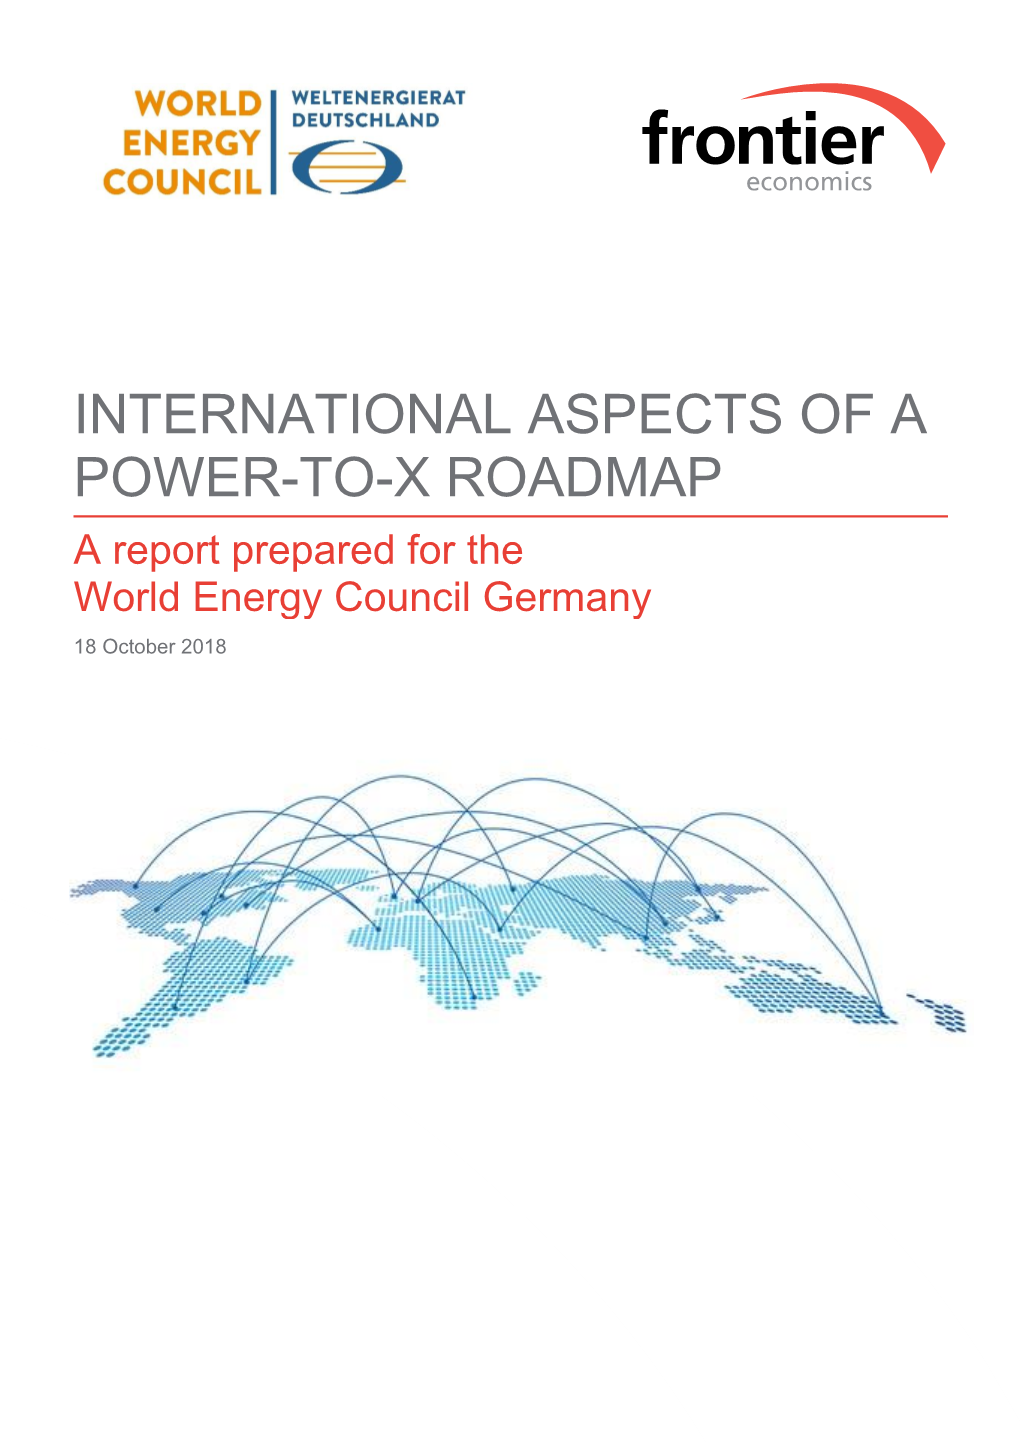 INTERNATIONAL ASPECTS of a POWER-TO-X ROADMAP a Report Prepared for the World Energy Council Germany 18 October 2018